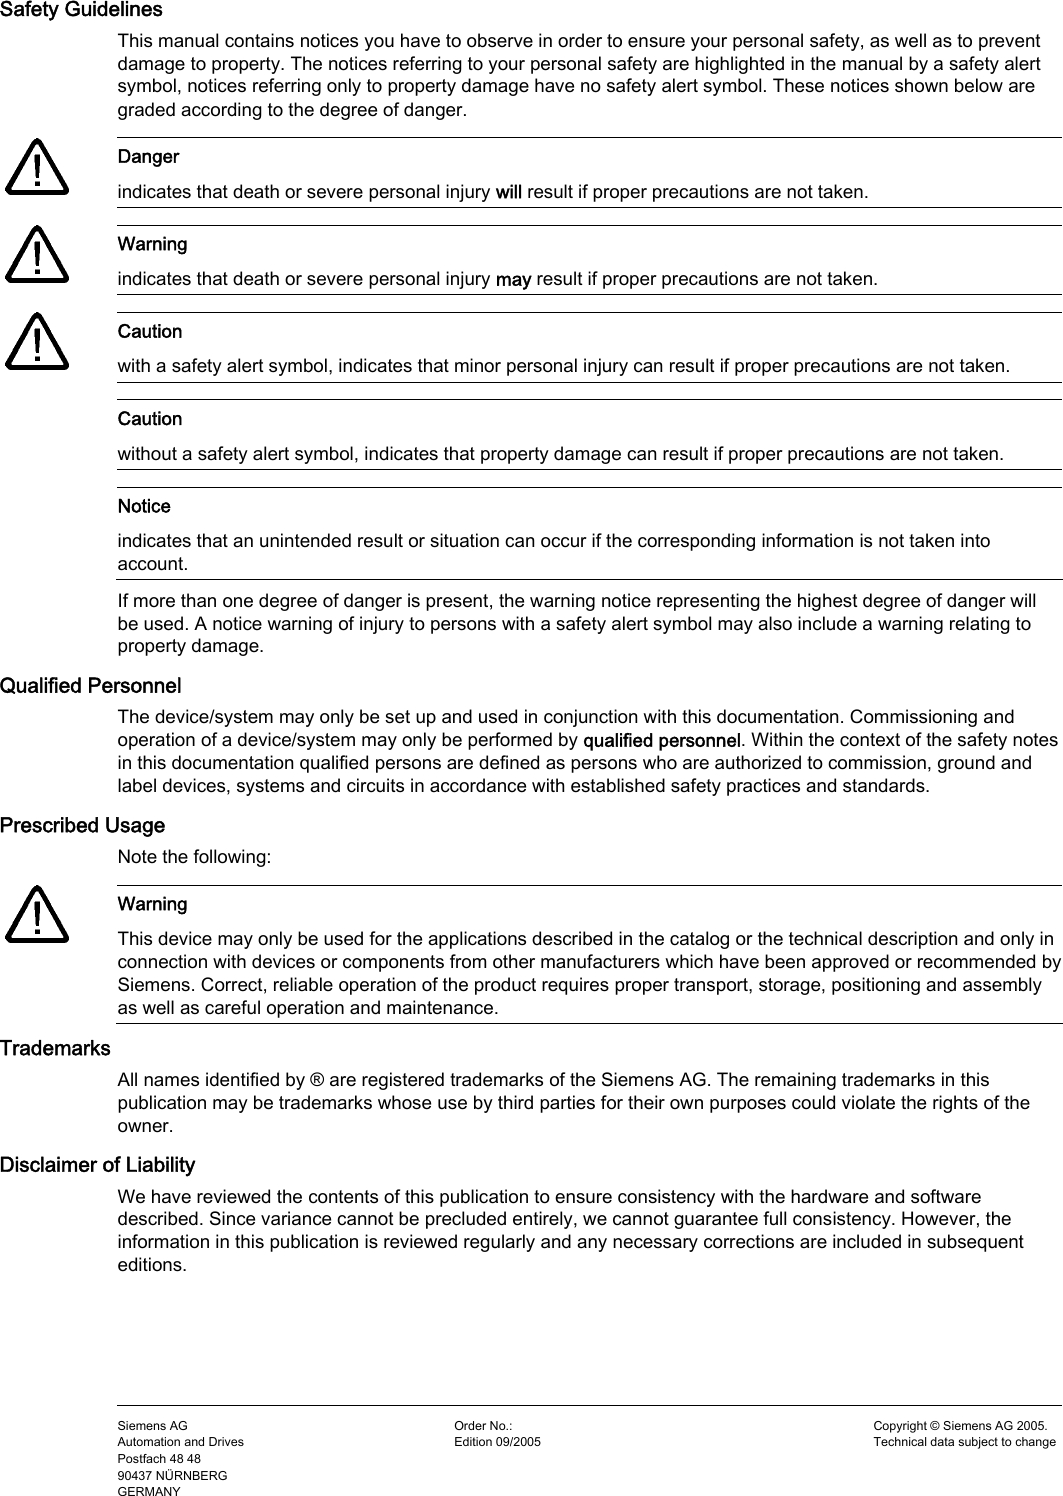      Safety Guidelines This manual contains notices you have to observe in order to ensure your personal safety, as well as to prevent damage to property. The notices referring to your personal safety are highlighted in the manual by a safety alert symbol, notices referring only to property damage have no safety alert symbol. These notices shown below are graded according to the degree of danger.    Danger indicates that death or severe personal injury will result if proper precautions are not taken.    Warning indicates that death or severe personal injury may result if proper precautions are not taken.    Caution with a safety alert symbol, indicates that minor personal injury can result if proper precautions are not taken.  Caution without a safety alert symbol, indicates that property damage can result if proper precautions are not taken.  Notice indicates that an unintended result or situation can occur if the corresponding information is not taken into account. If more than one degree of danger is present, the warning notice representing the highest degree of danger will be used. A notice warning of injury to persons with a safety alert symbol may also include a warning relating to property damage. Qualified Personnel The device/system may only be set up and used in conjunction with this documentation. Commissioning and operation of a device/system may only be performed by qualified personnel. Within the context of the safety notes in this documentation qualified persons are defined as persons who are authorized to commission, ground and label devices, systems and circuits in accordance with established safety practices and standards. Prescribed Usage Note the following:    Warning This device may only be used for the applications described in the catalog or the technical description and only in connection with devices or components from other manufacturers which have been approved or recommended by Siemens. Correct, reliable operation of the product requires proper transport, storage, positioning and assembly as well as careful operation and maintenance. Trademarks All names identified by ® are registered trademarks of the Siemens AG. The remaining trademarks in this publication may be trademarks whose use by third parties for their own purposes could violate the rights of the owner. Disclaimer of Liability We have reviewed the contents of this publication to ensure consistency with the hardware and software described. Since variance cannot be precluded entirely, we cannot guarantee full consistency. However, the information in this publication is reviewed regularly and any necessary corrections are included in subsequent editions.    Siemens AG Automation and Drives Postfach 48 48 90437 NÜRNBERG GERMANY Order No.:   Edition 09/2005 Copyright © Siemens AG 2005. Technical data subject to change